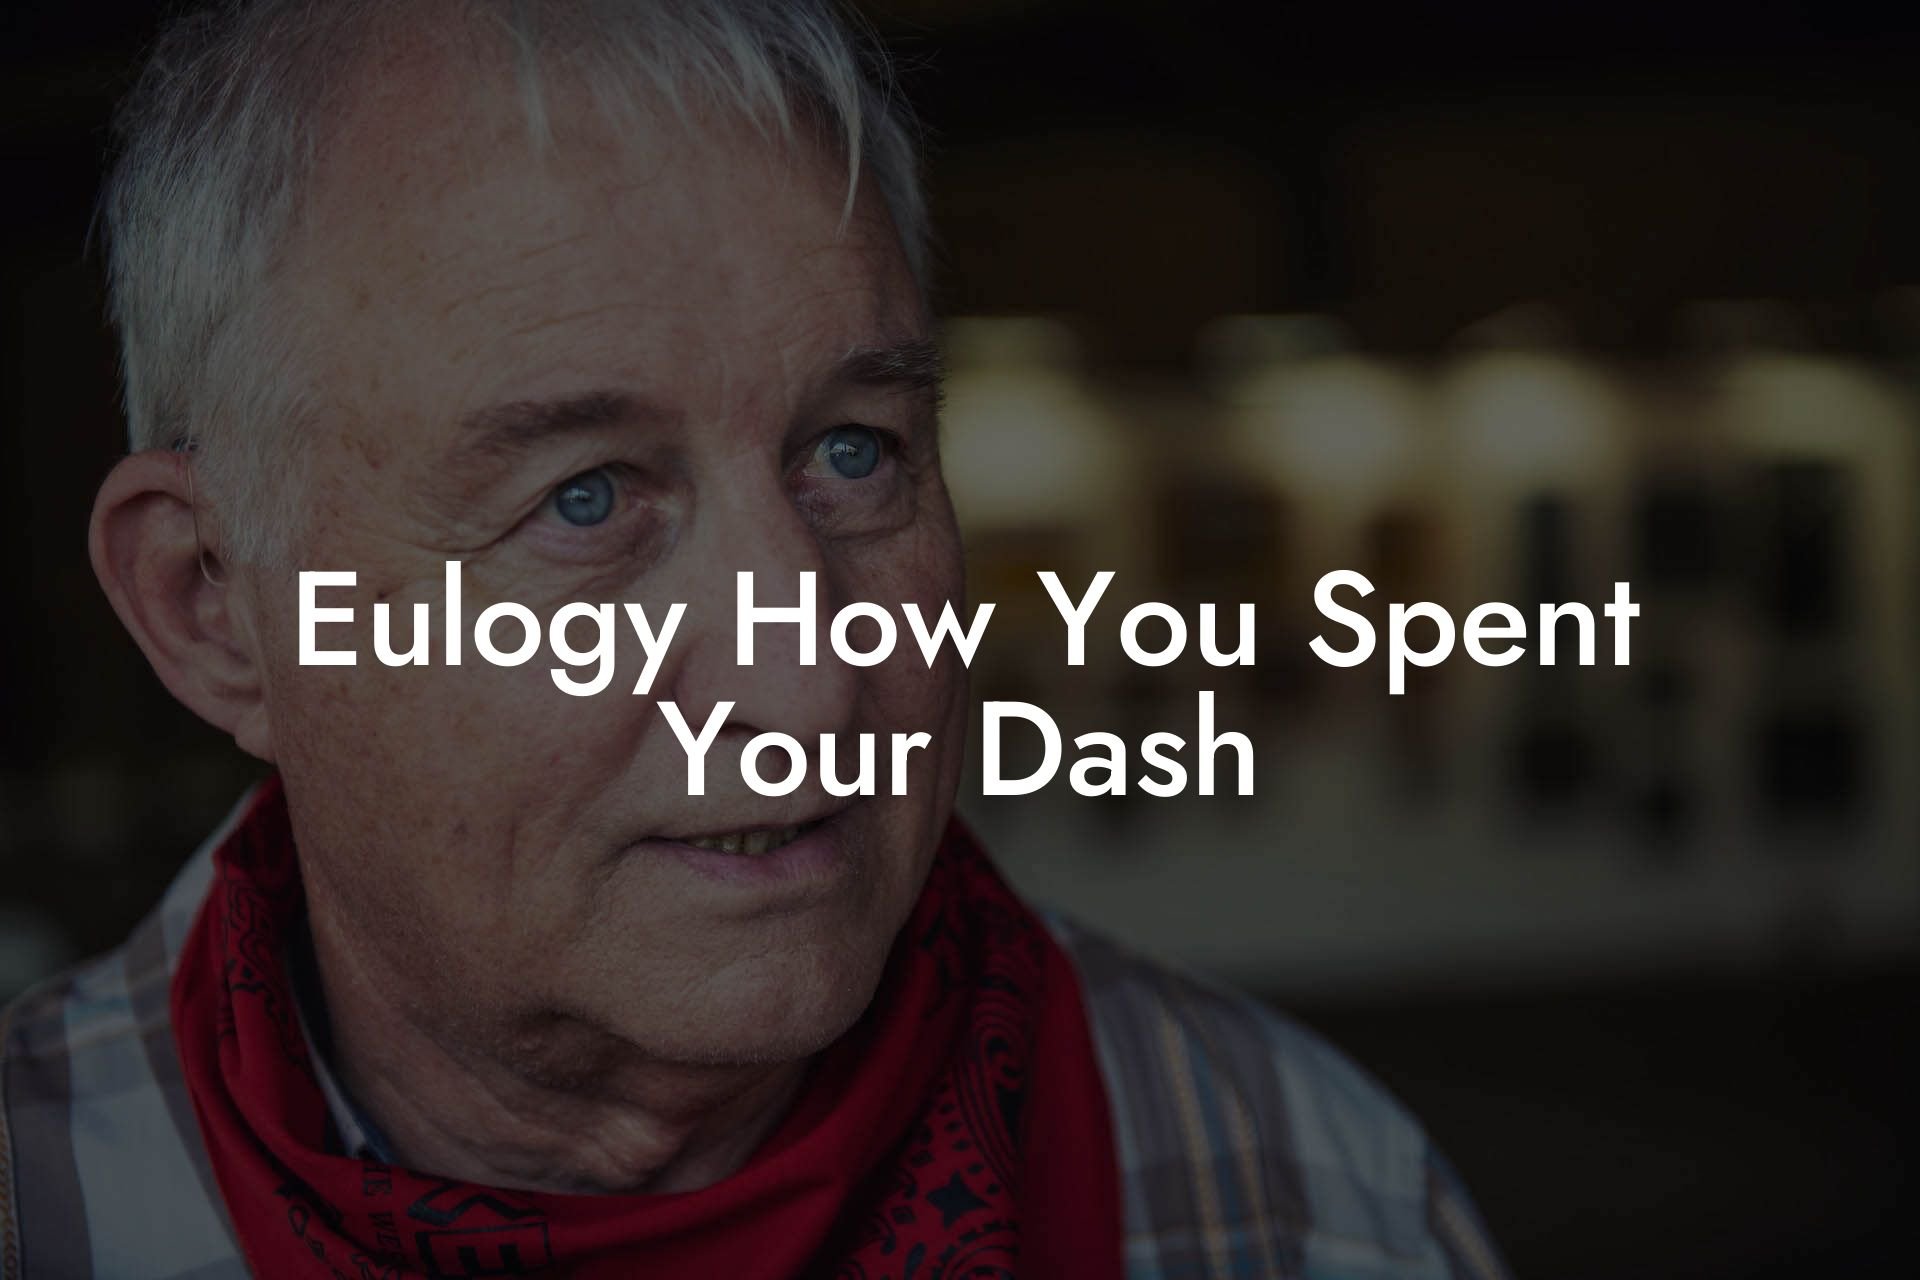 Eulogy How You Spent Your Dash